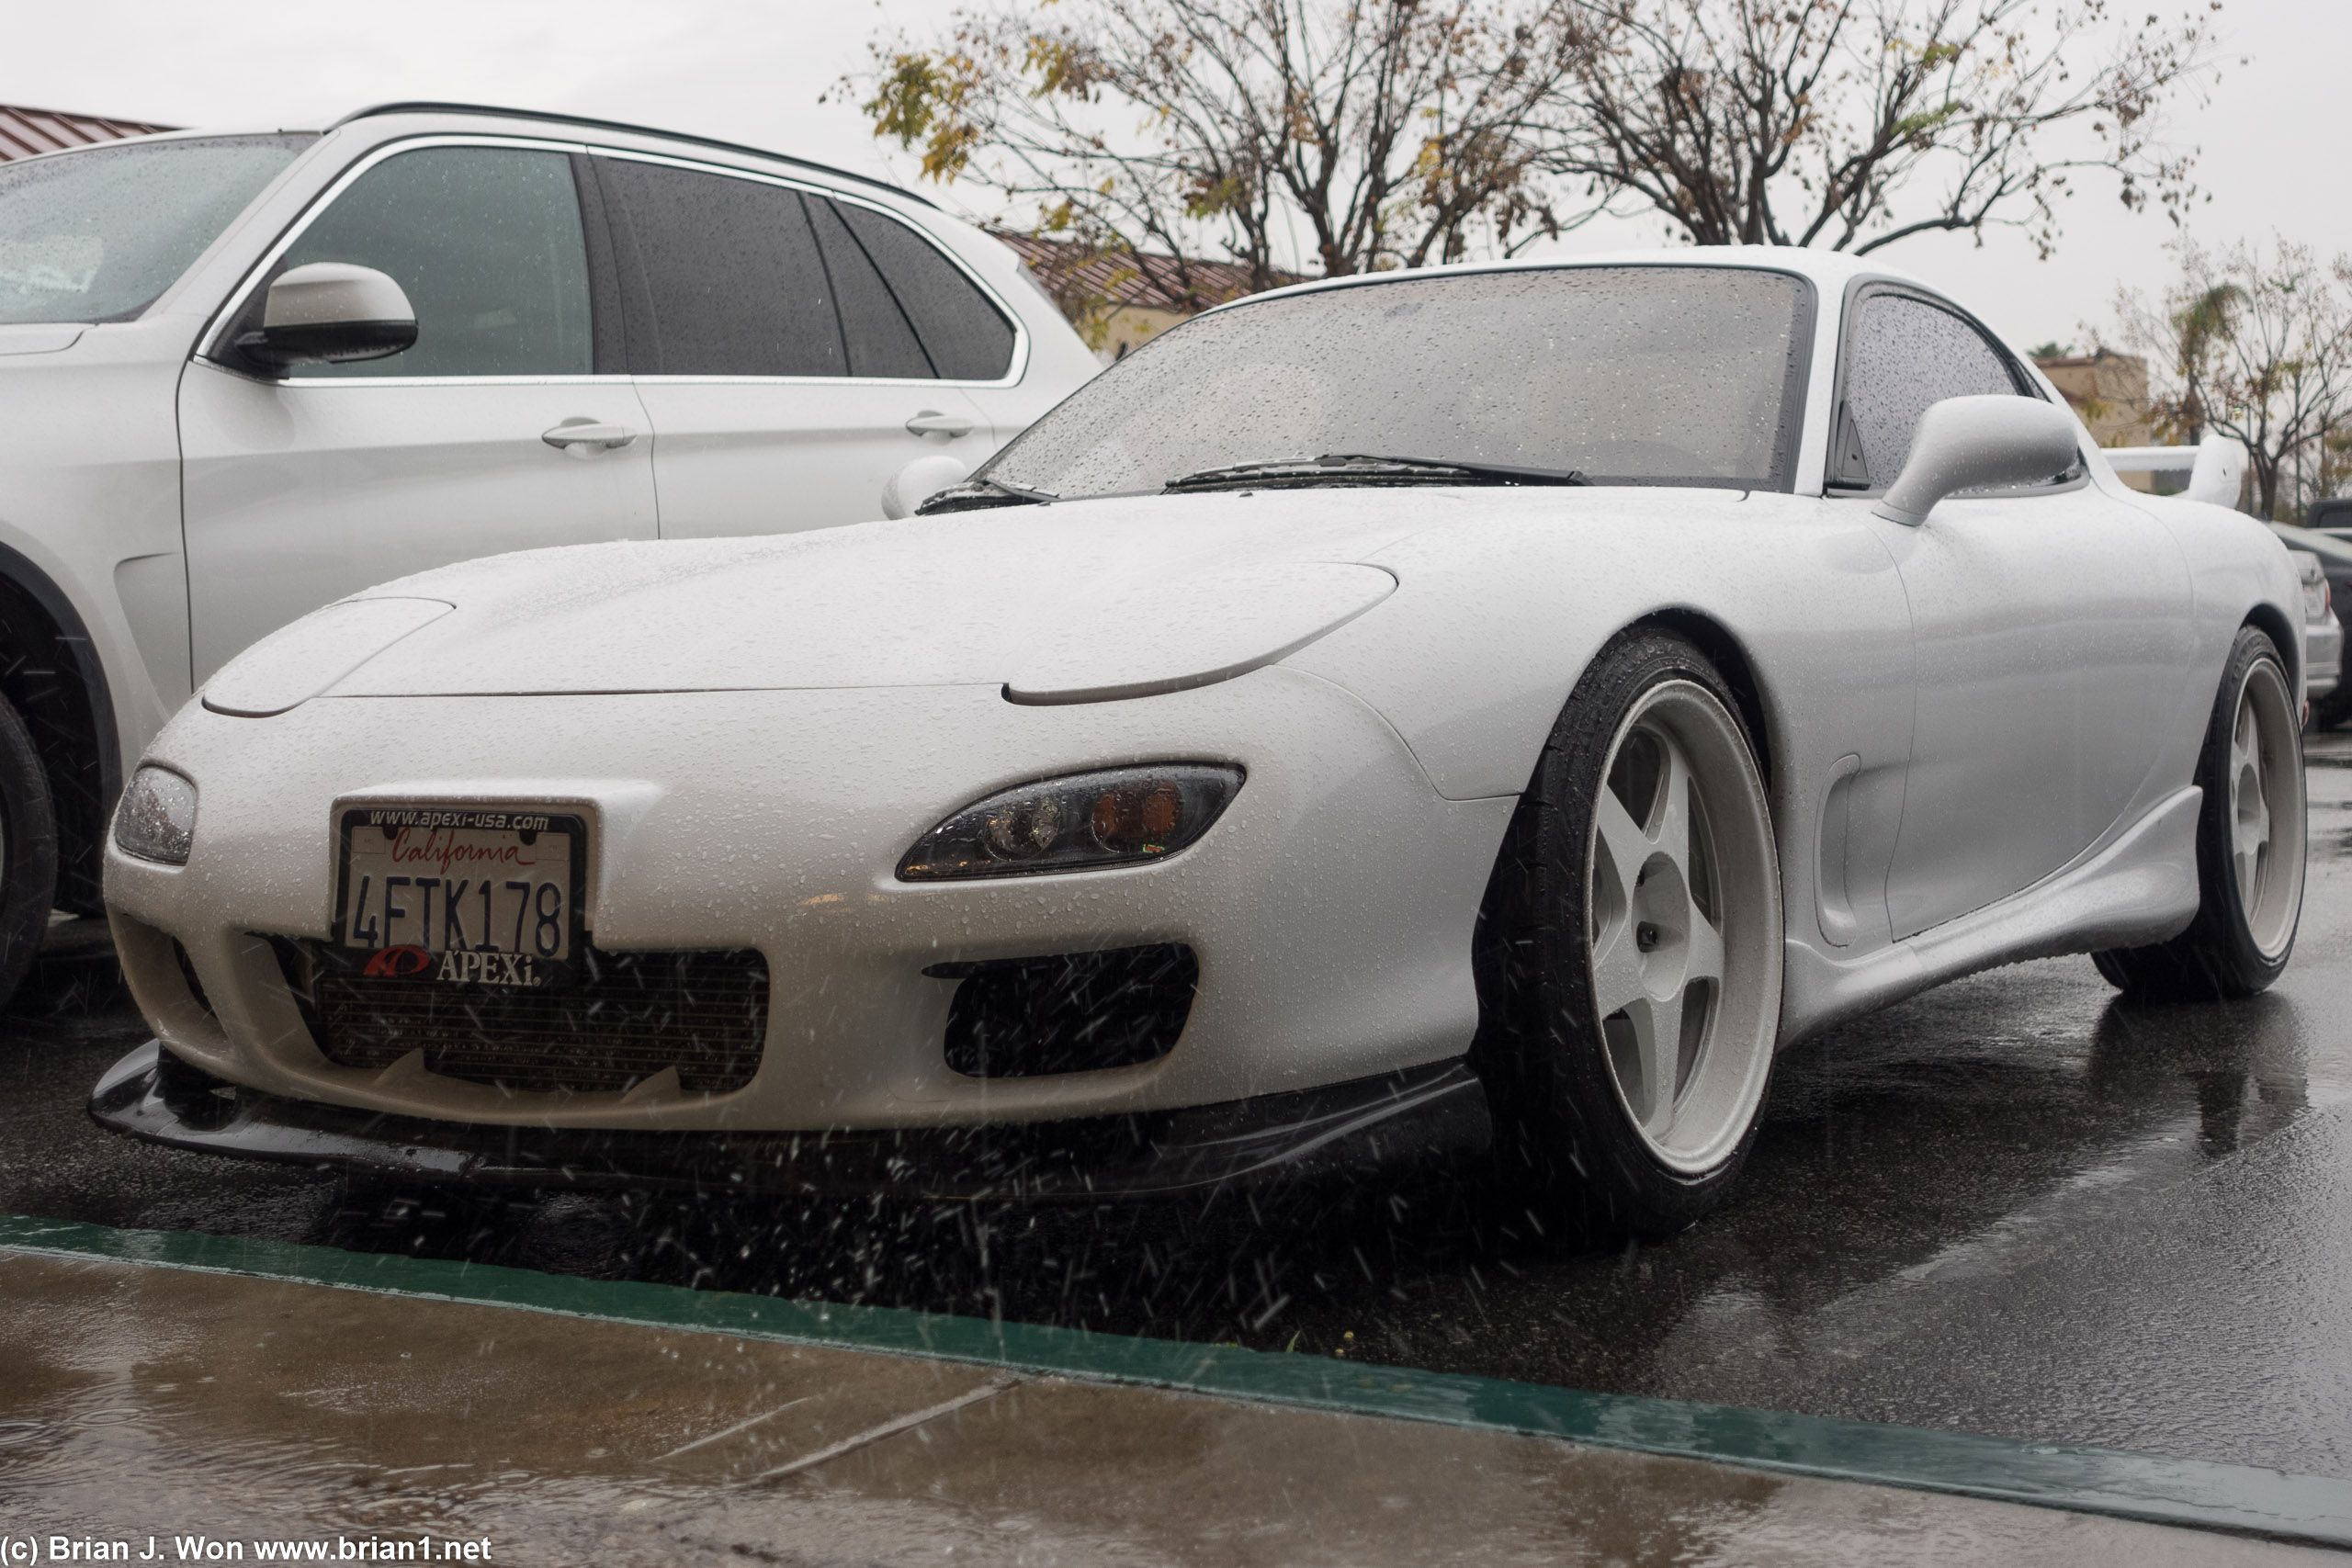 Very clean FD RX-7 parked outisde.